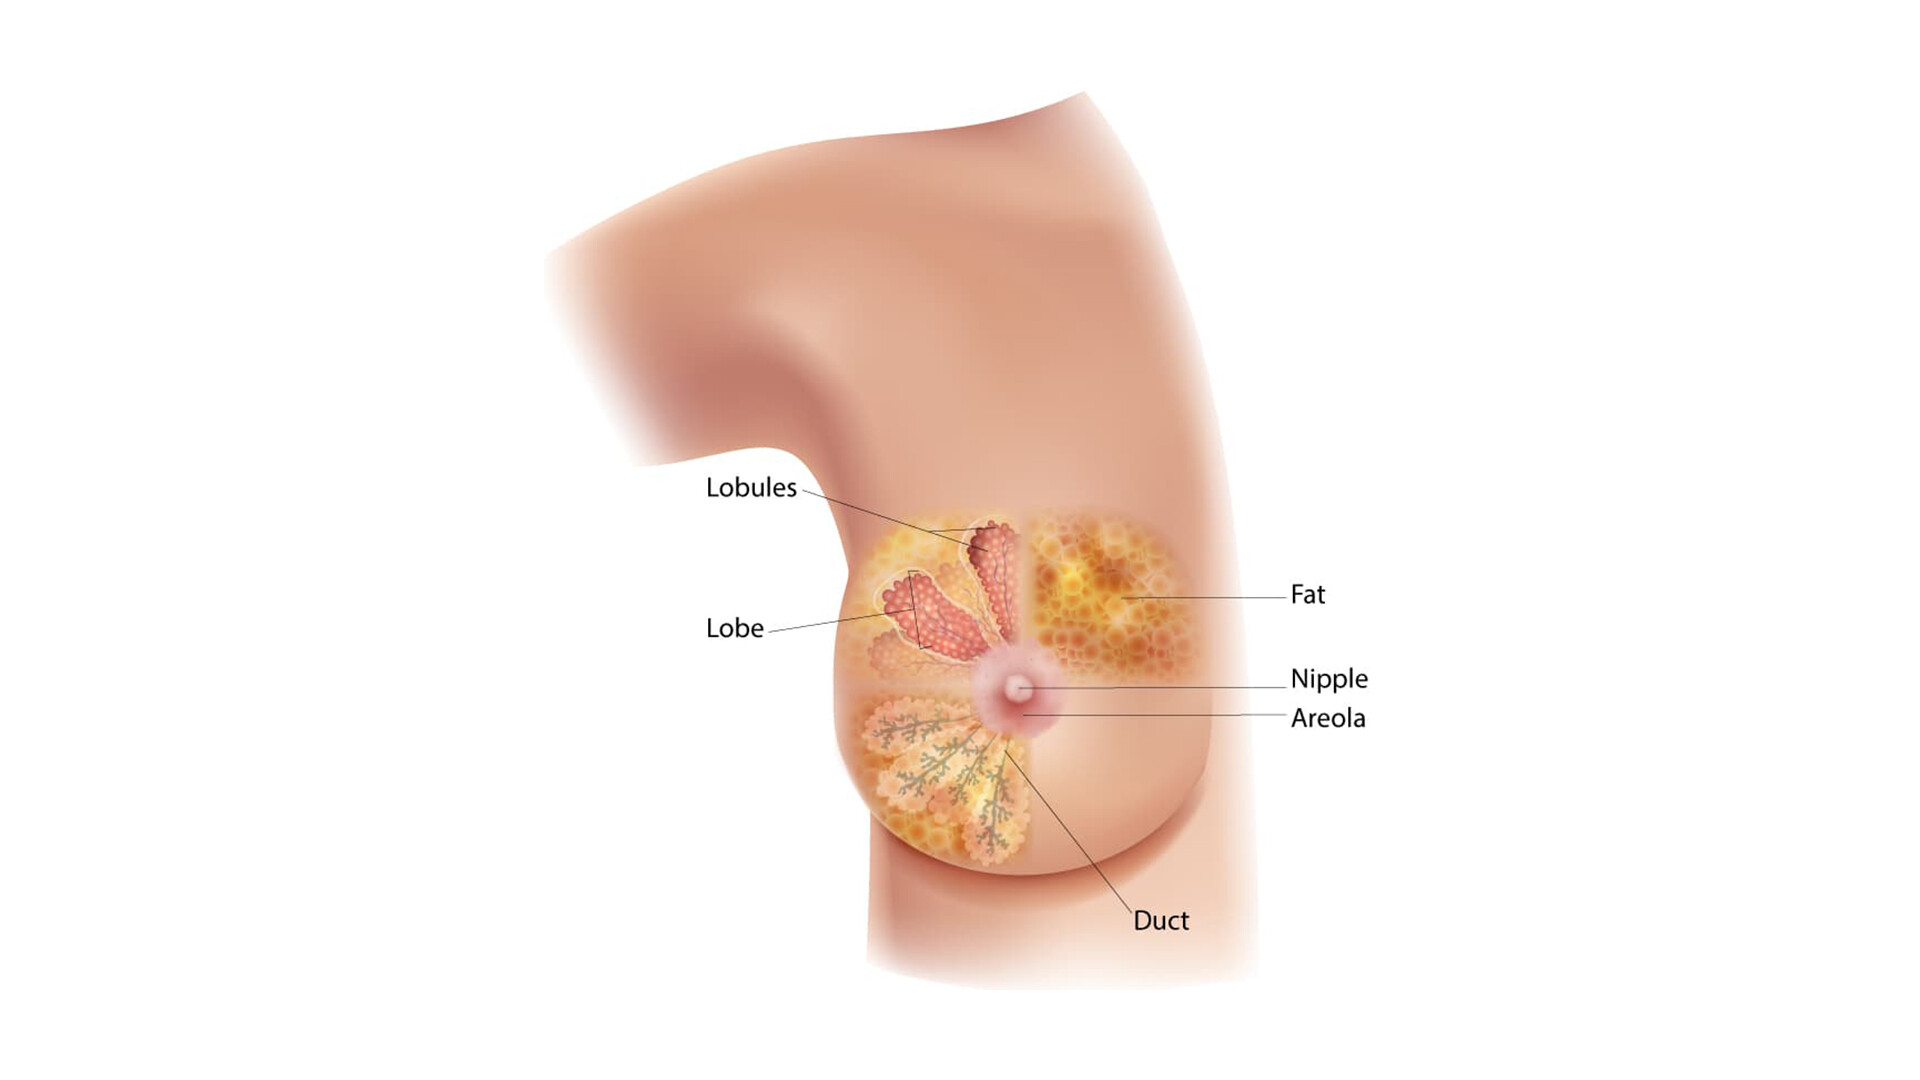 What Are the Symptoms of Breast Cancer? - StoryMD